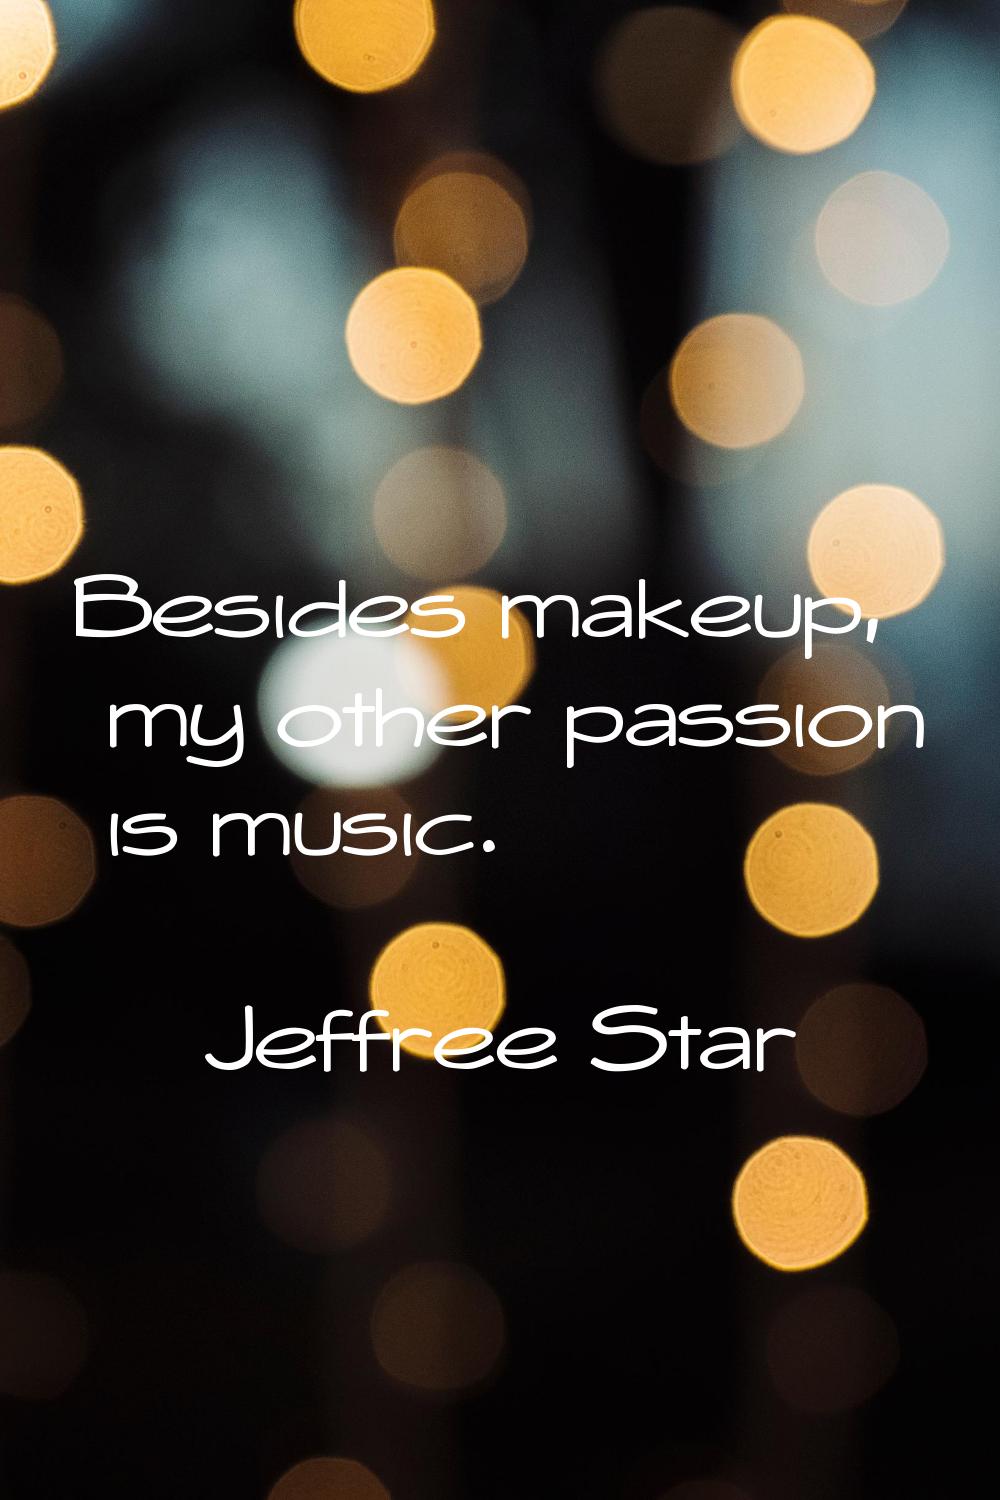 Besides makeup, my other passion is music.